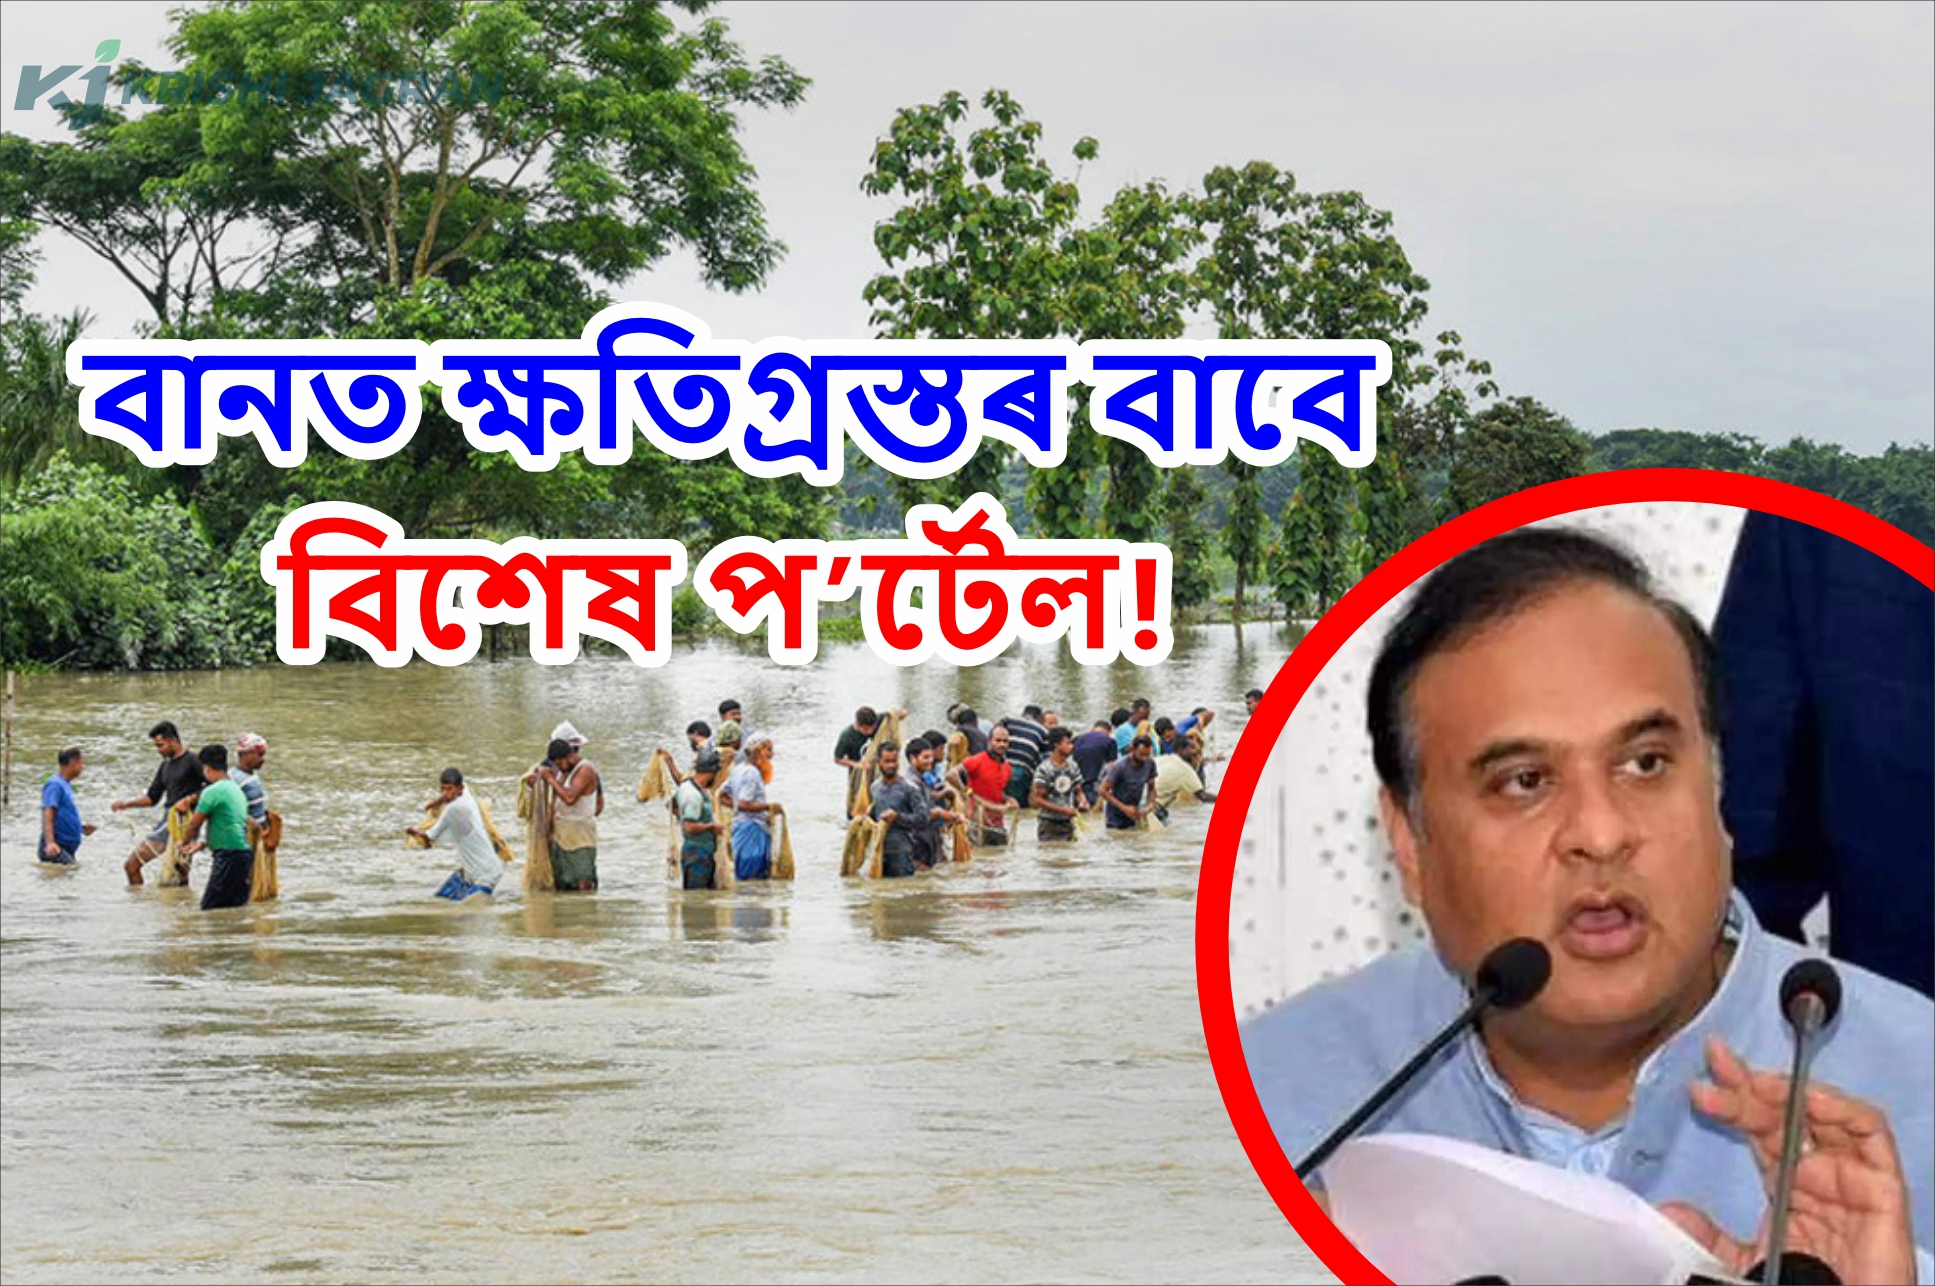 Special portal to be launched for flood victims, chief minister Dr Himanta Biswa Sharma announces.